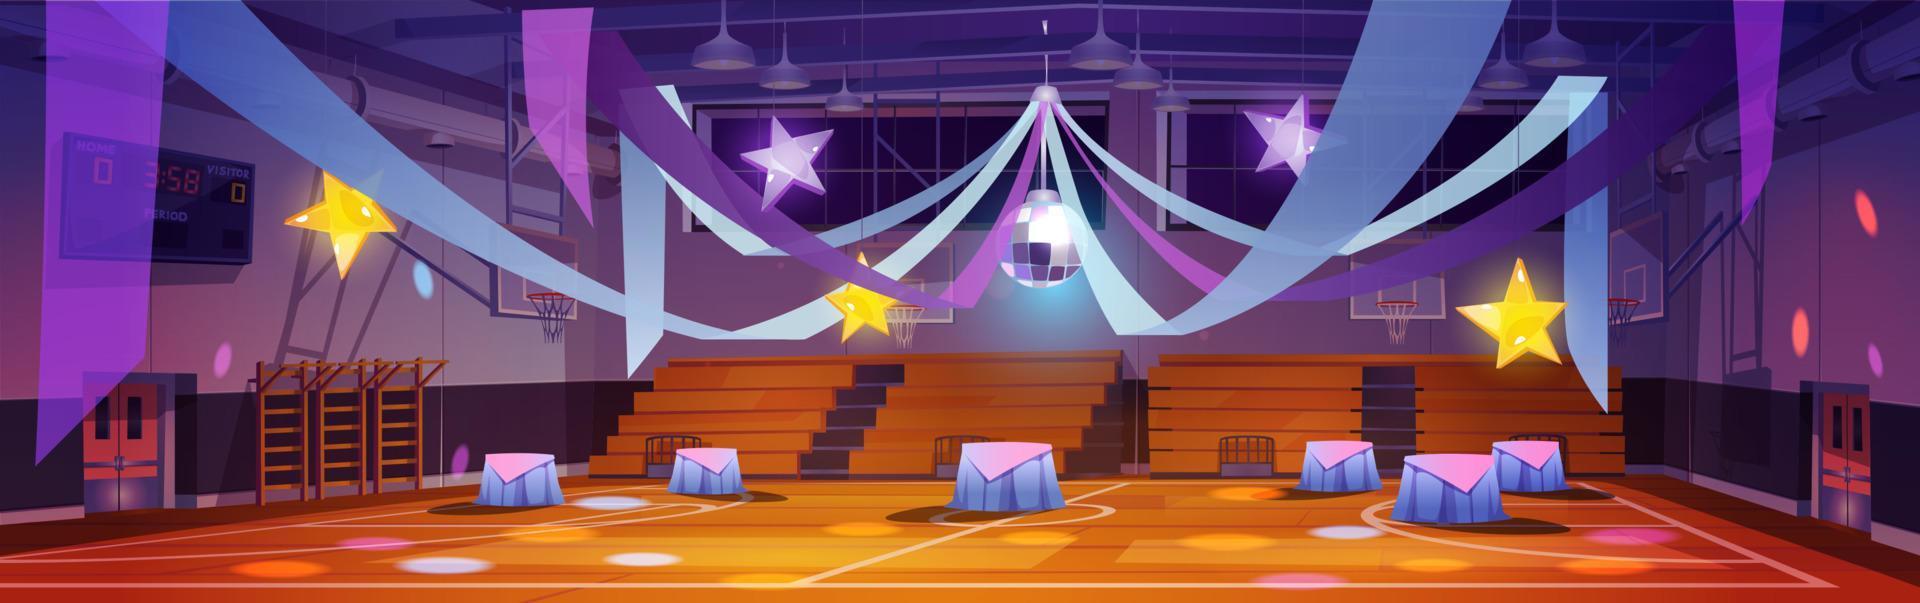 School gym interior ready for prom night or party vector